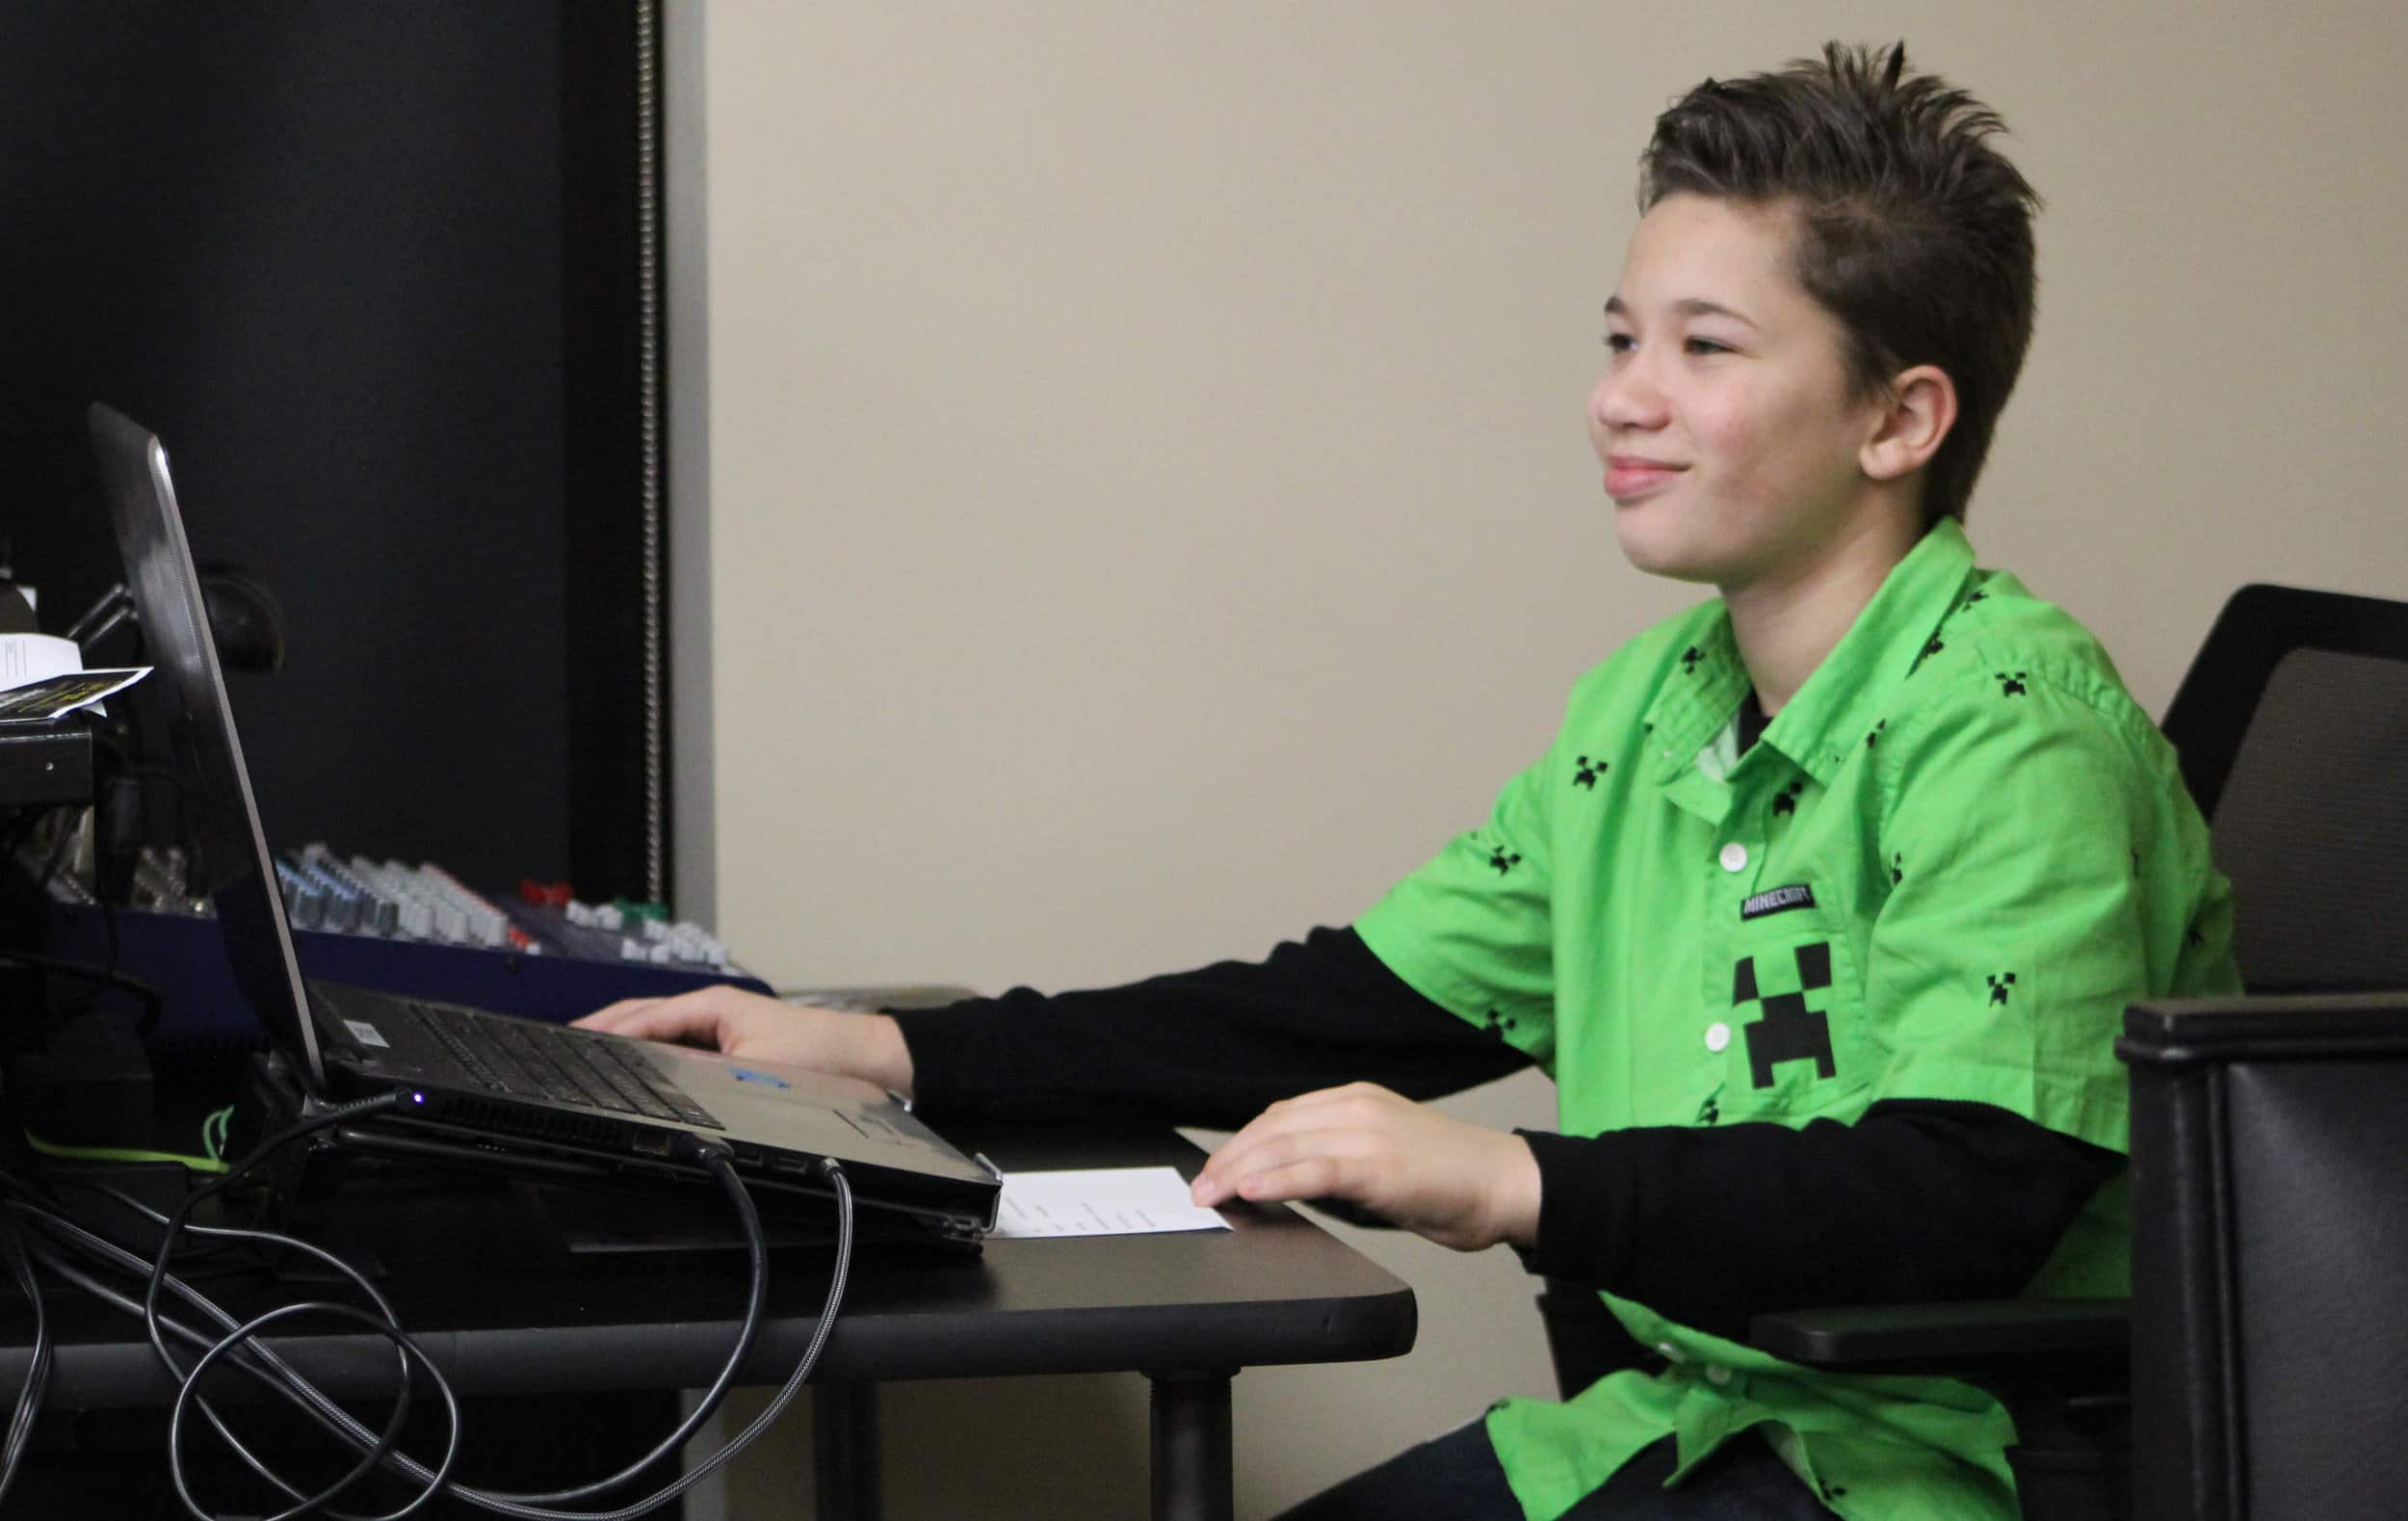 Fifth grader, Brian Fowler serves as the technician and computer operator for Trinity Kids.